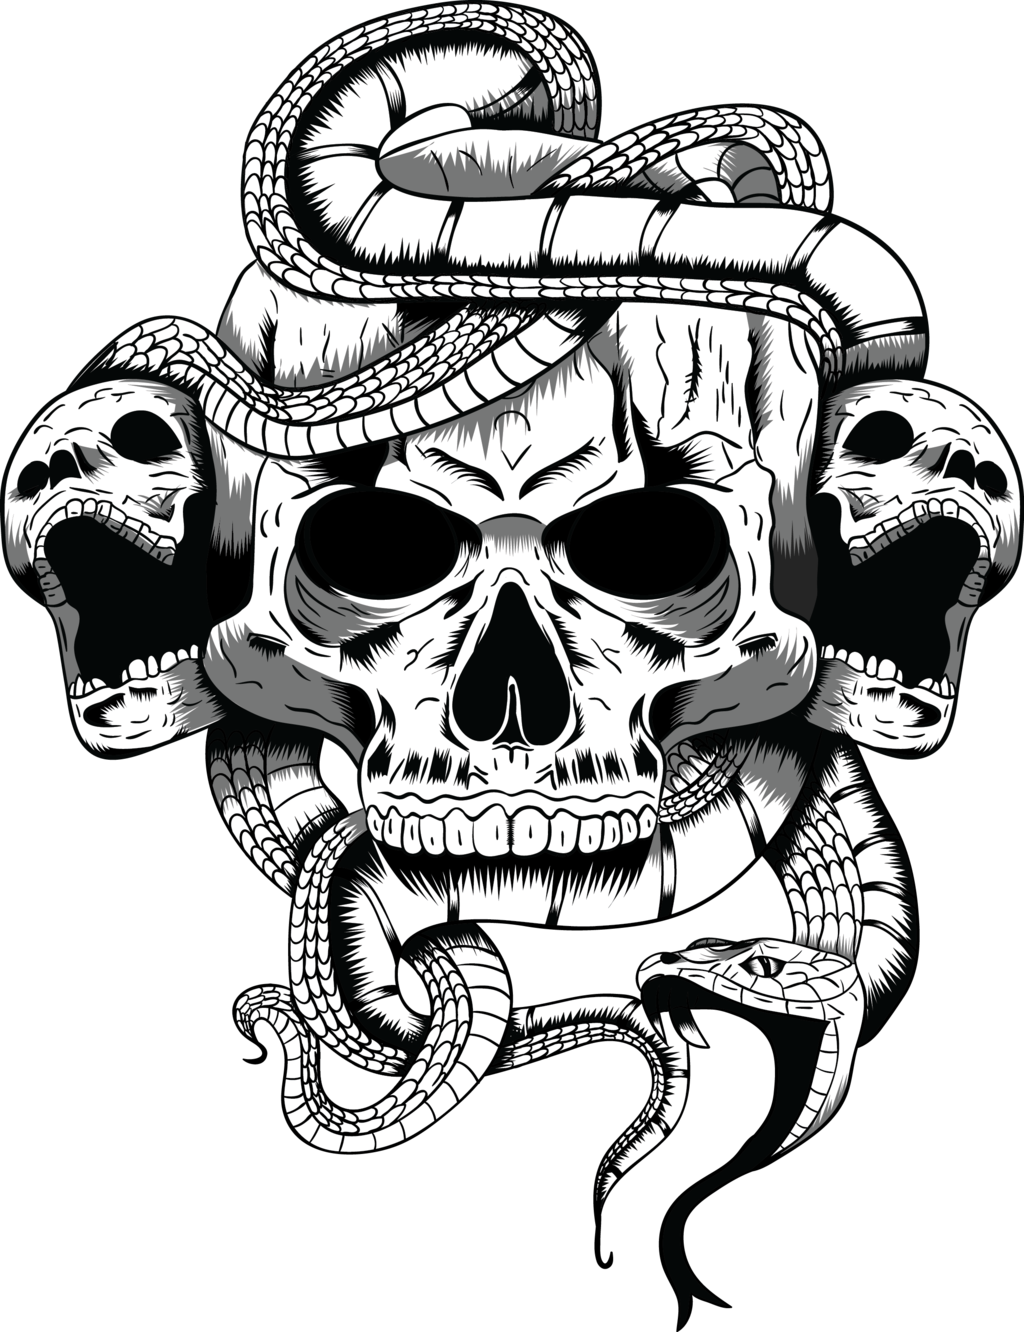 A Skull With Snakes Around It